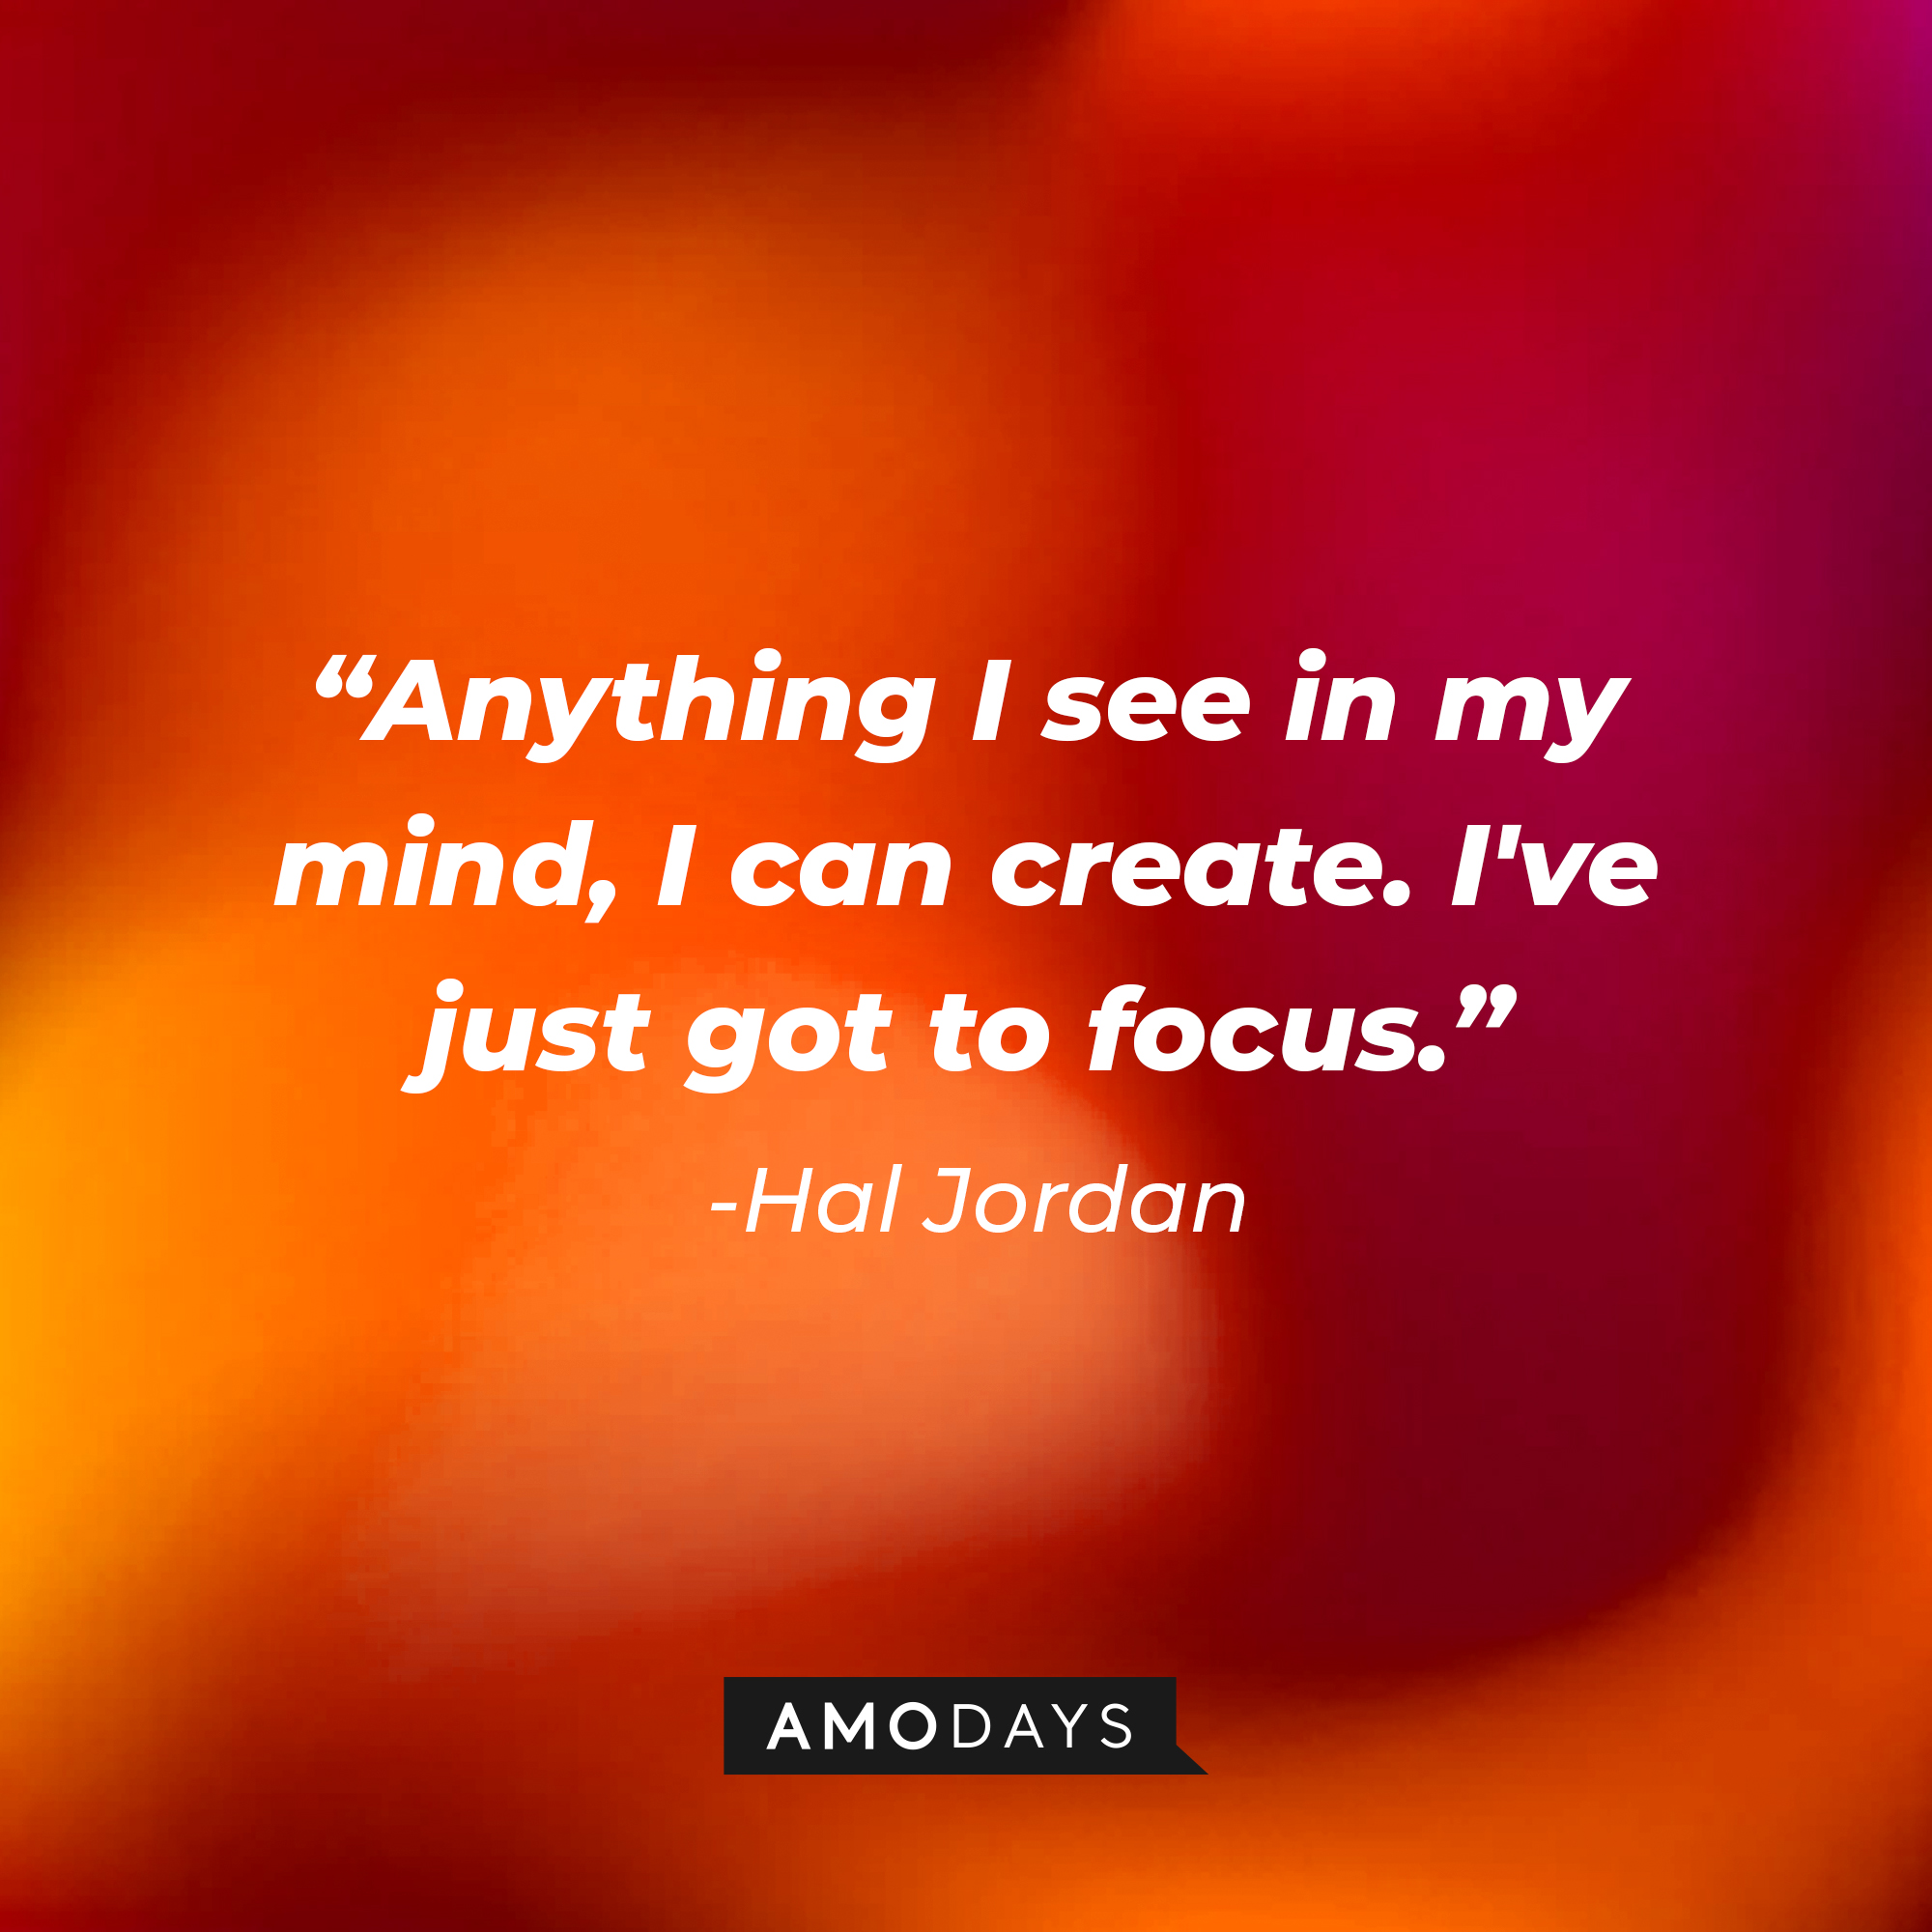 Hal Jordan's quote: "Anything I see in my mind, I can create. I've just got to focus." | Source: AmoDays